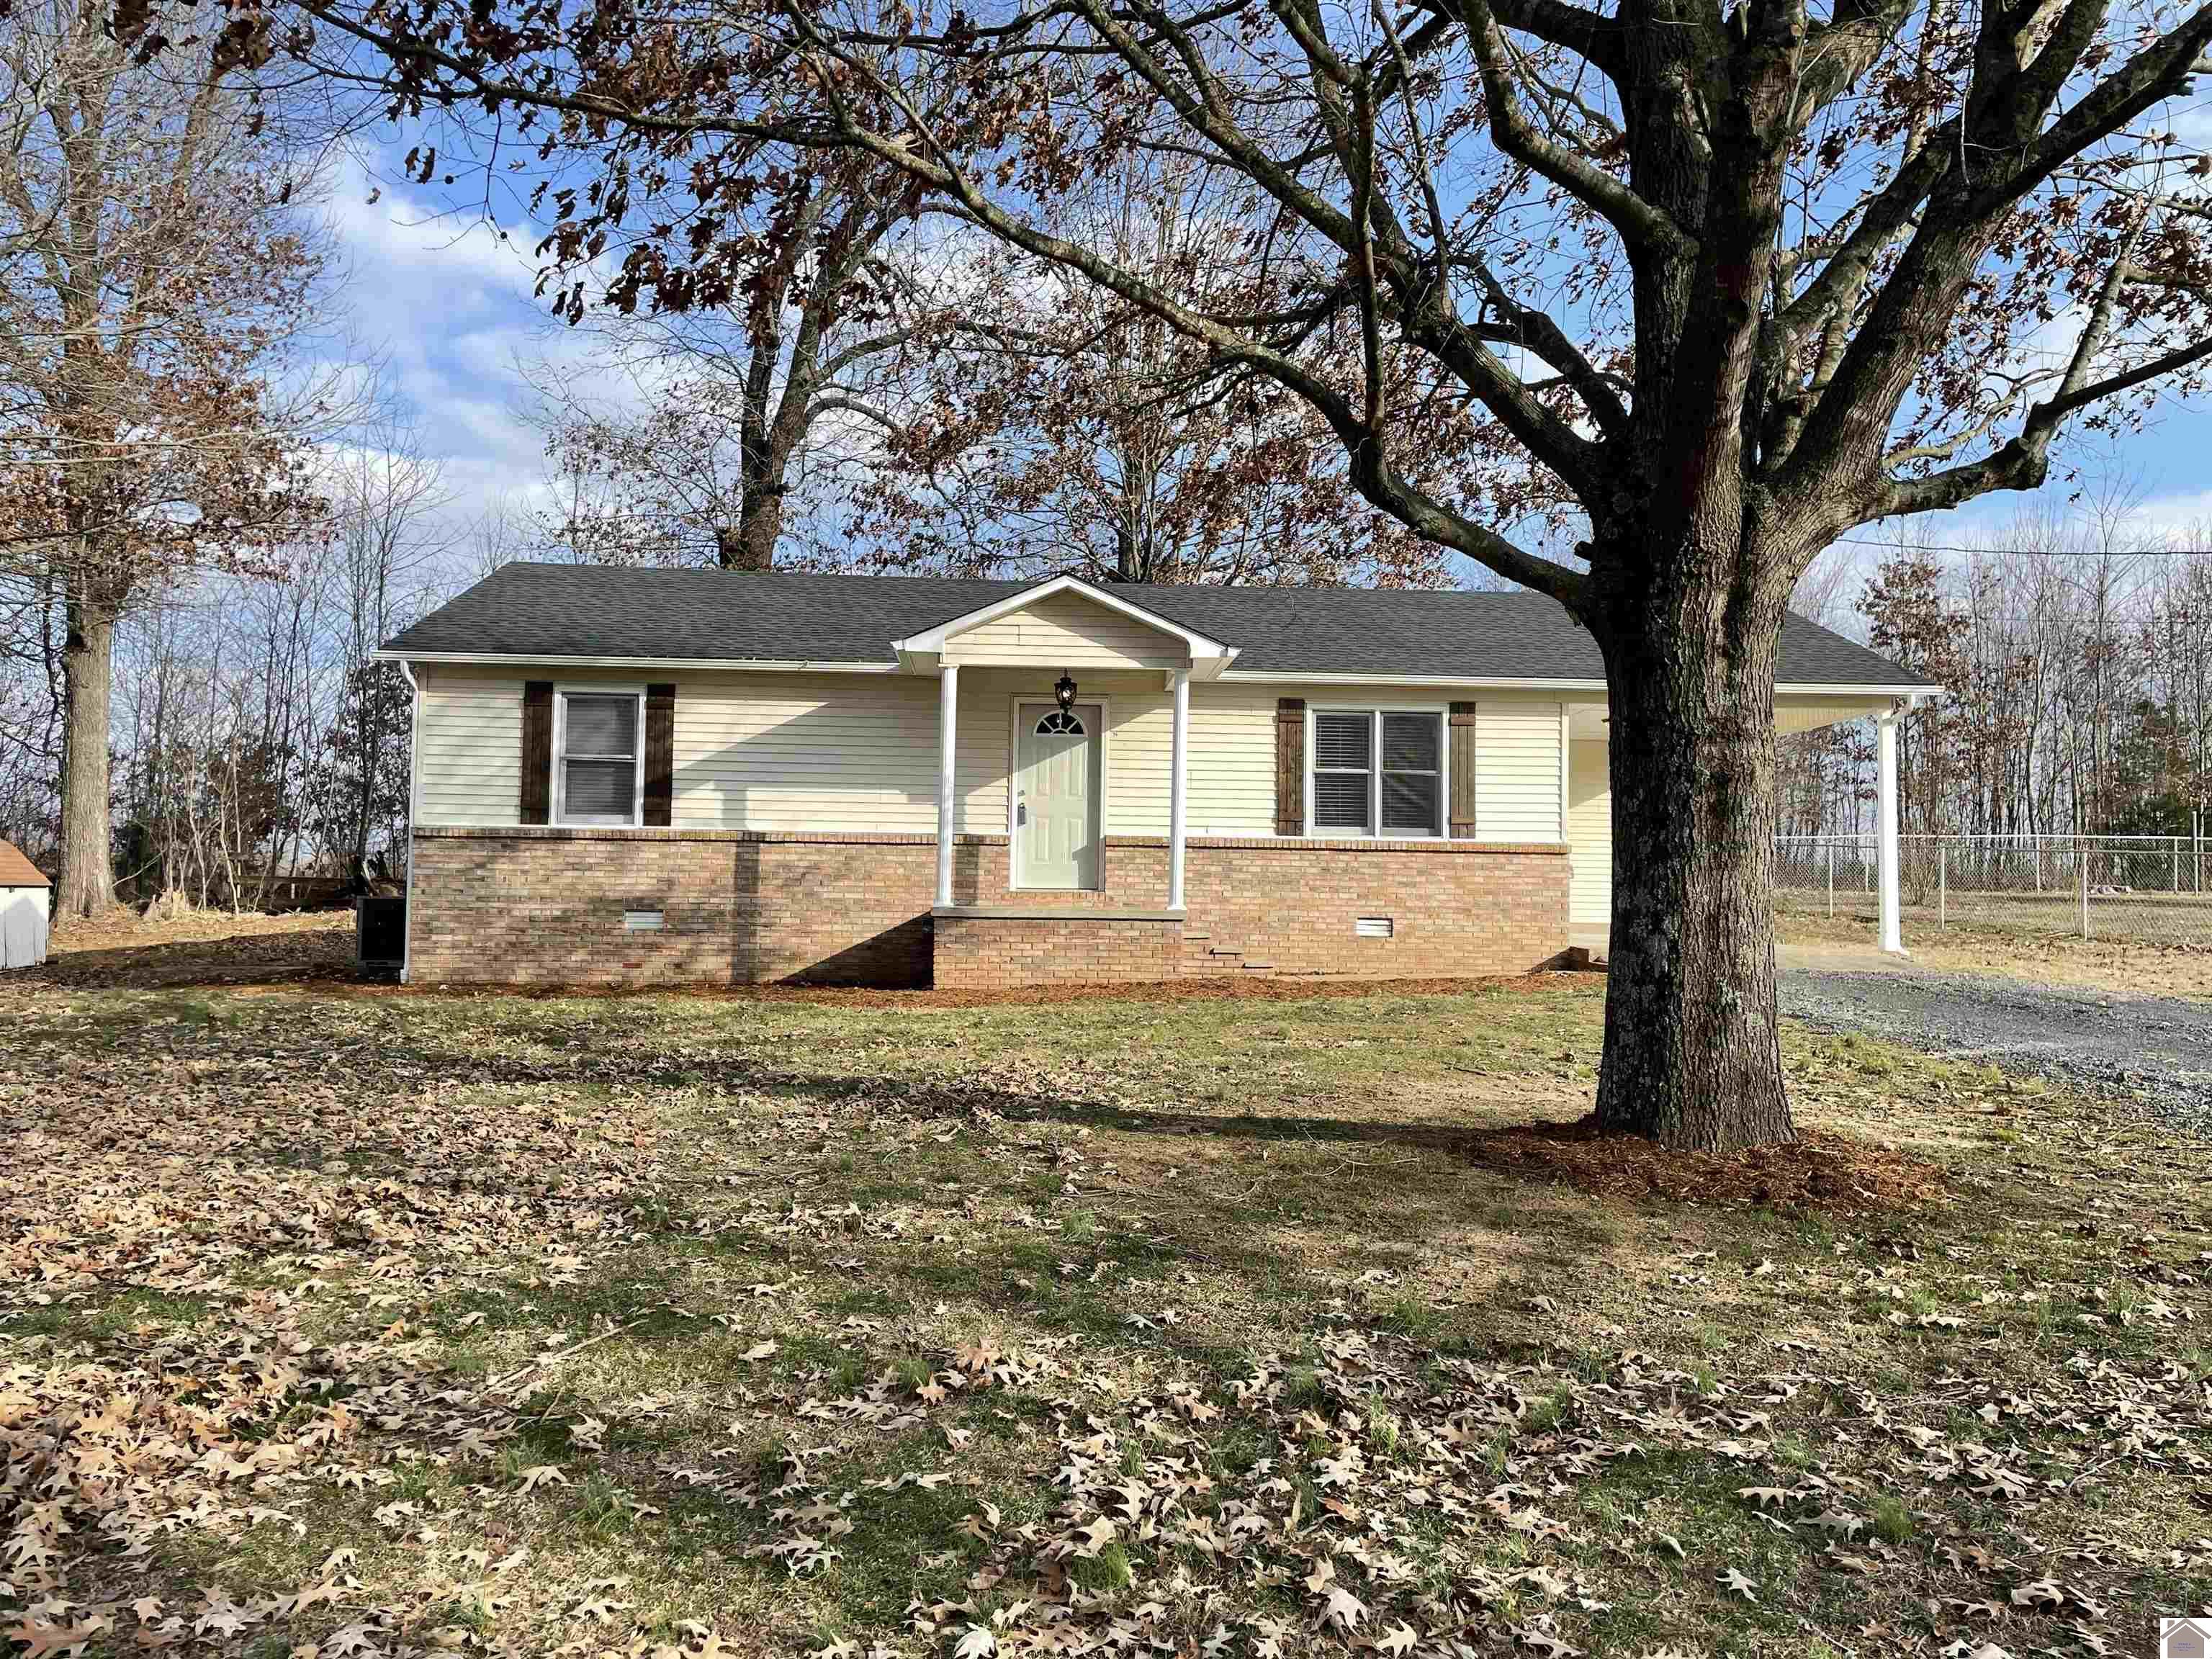 76 Local Drive, Mayfield, KY 42066